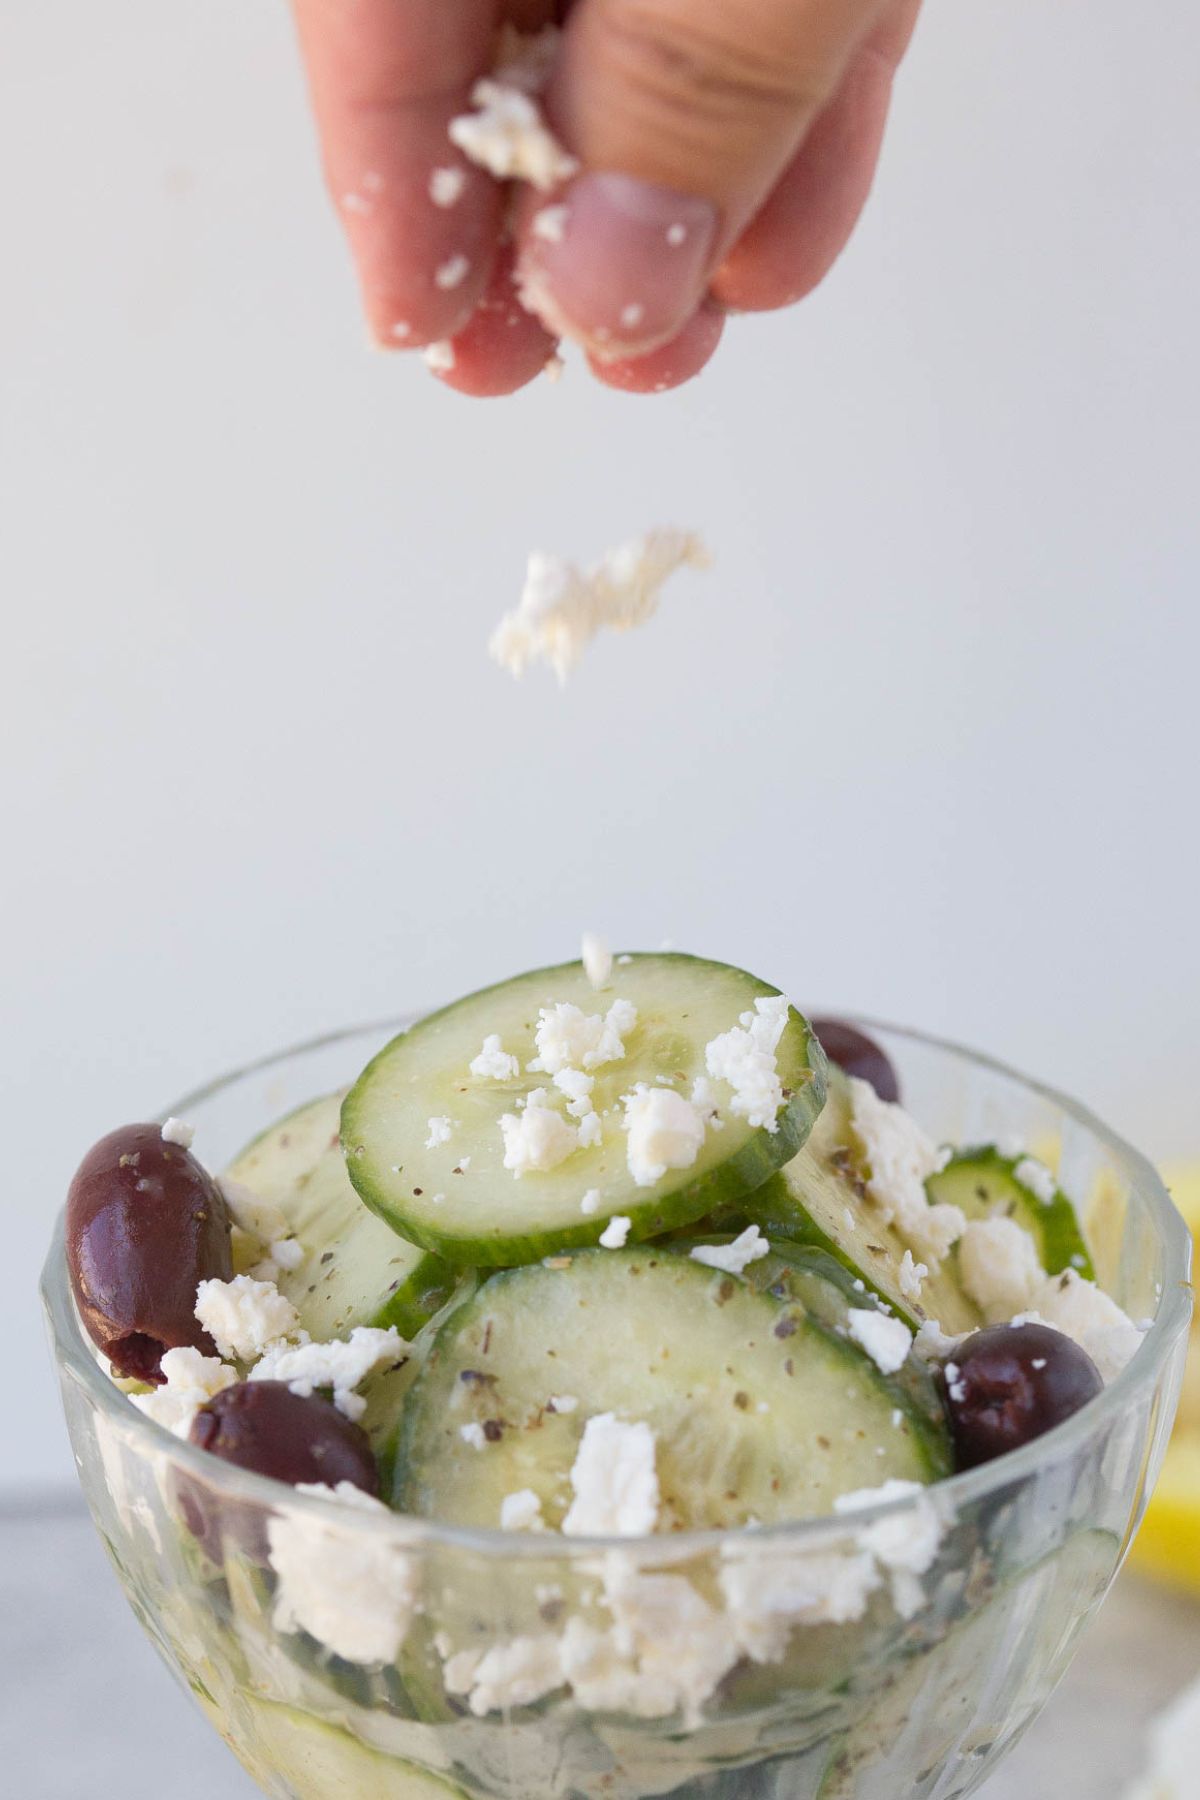 feta cheese being sprinkled onto cucumber salad